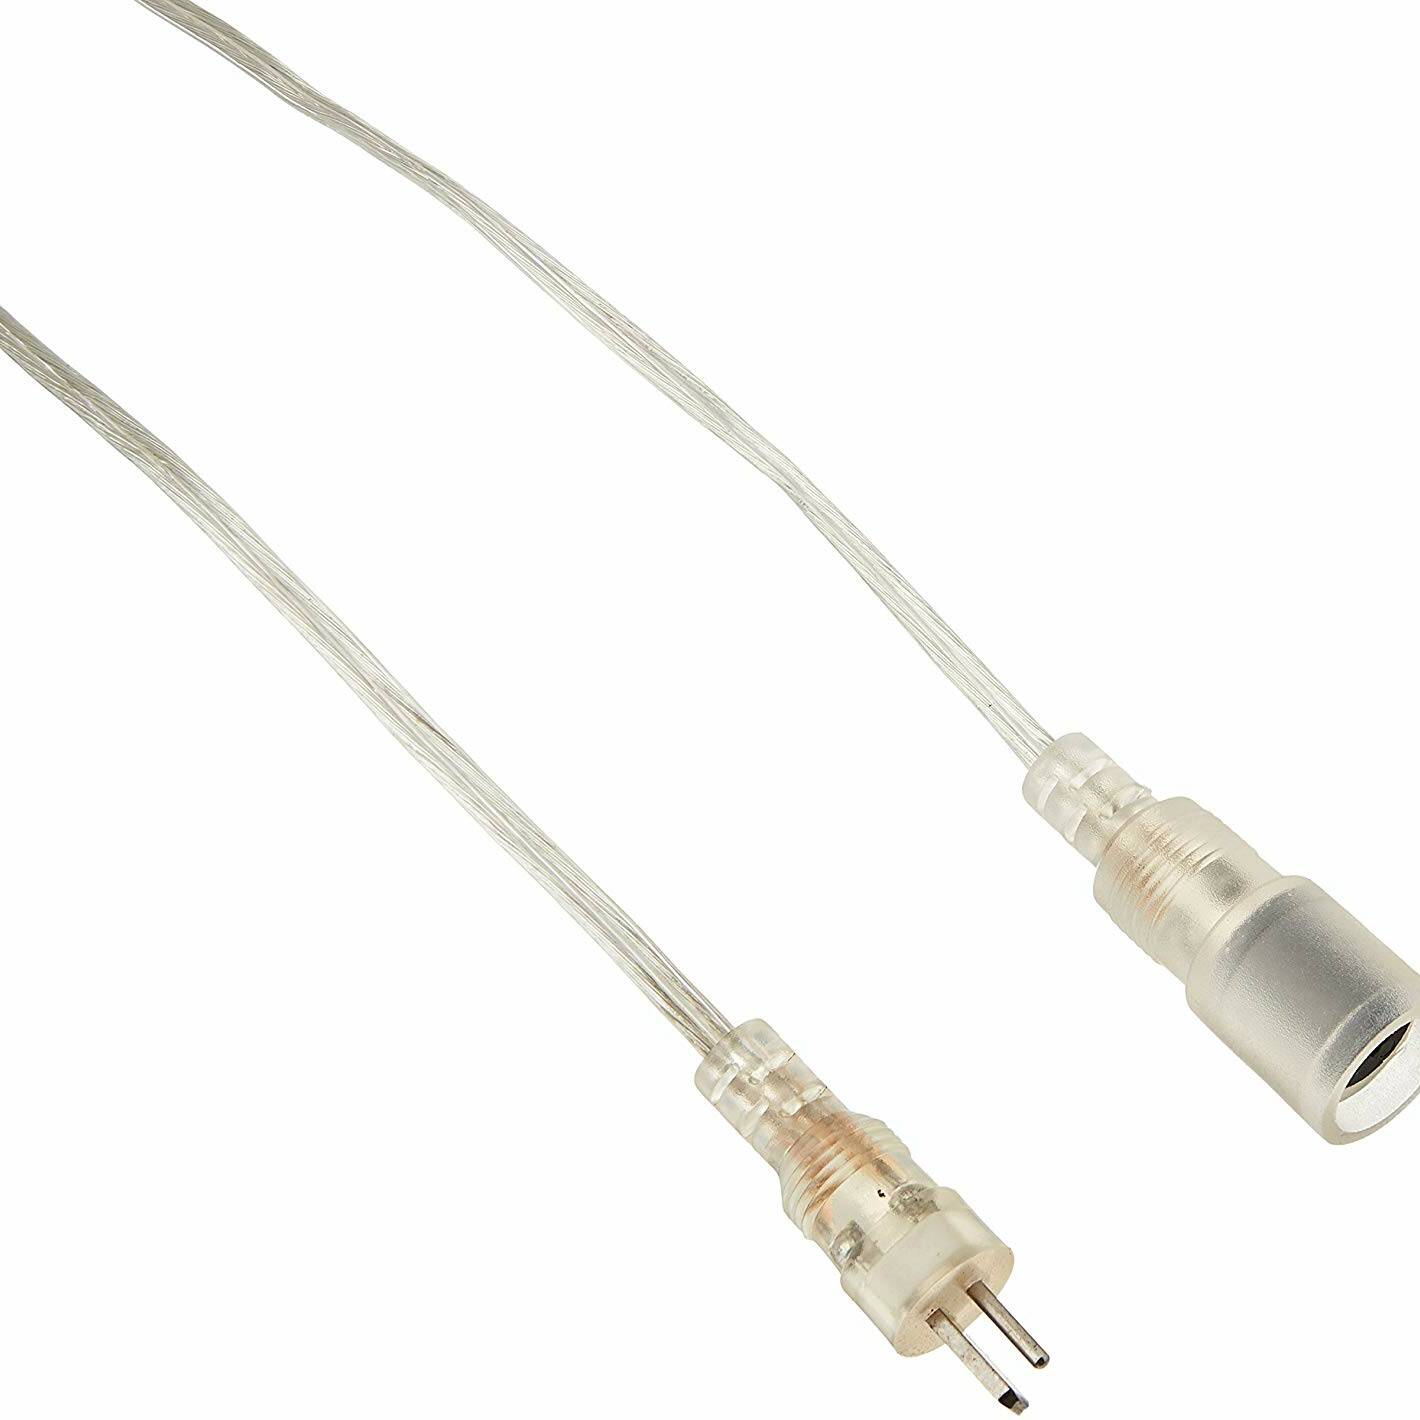 Oase biOrb Extension Lead For Lights Or Pumps (46009)